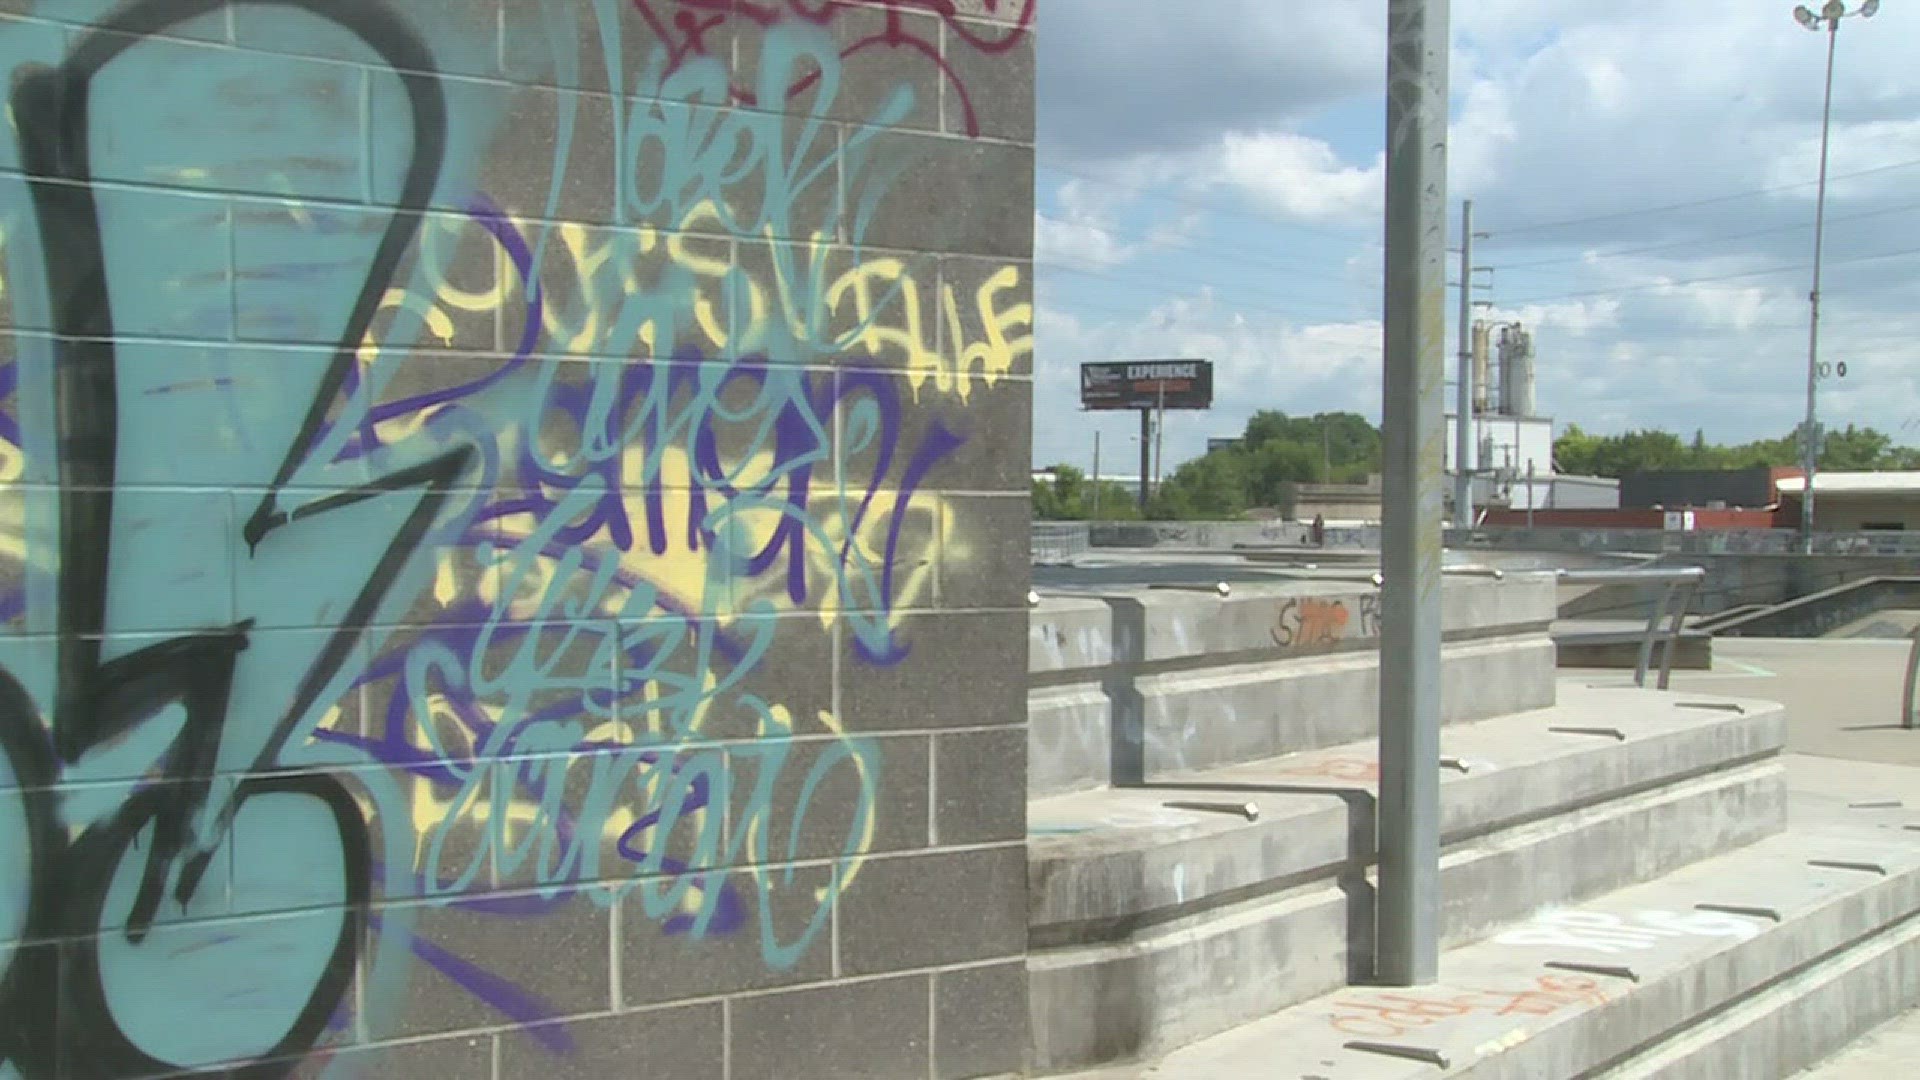 Graffiti is a costly problem in Louisville